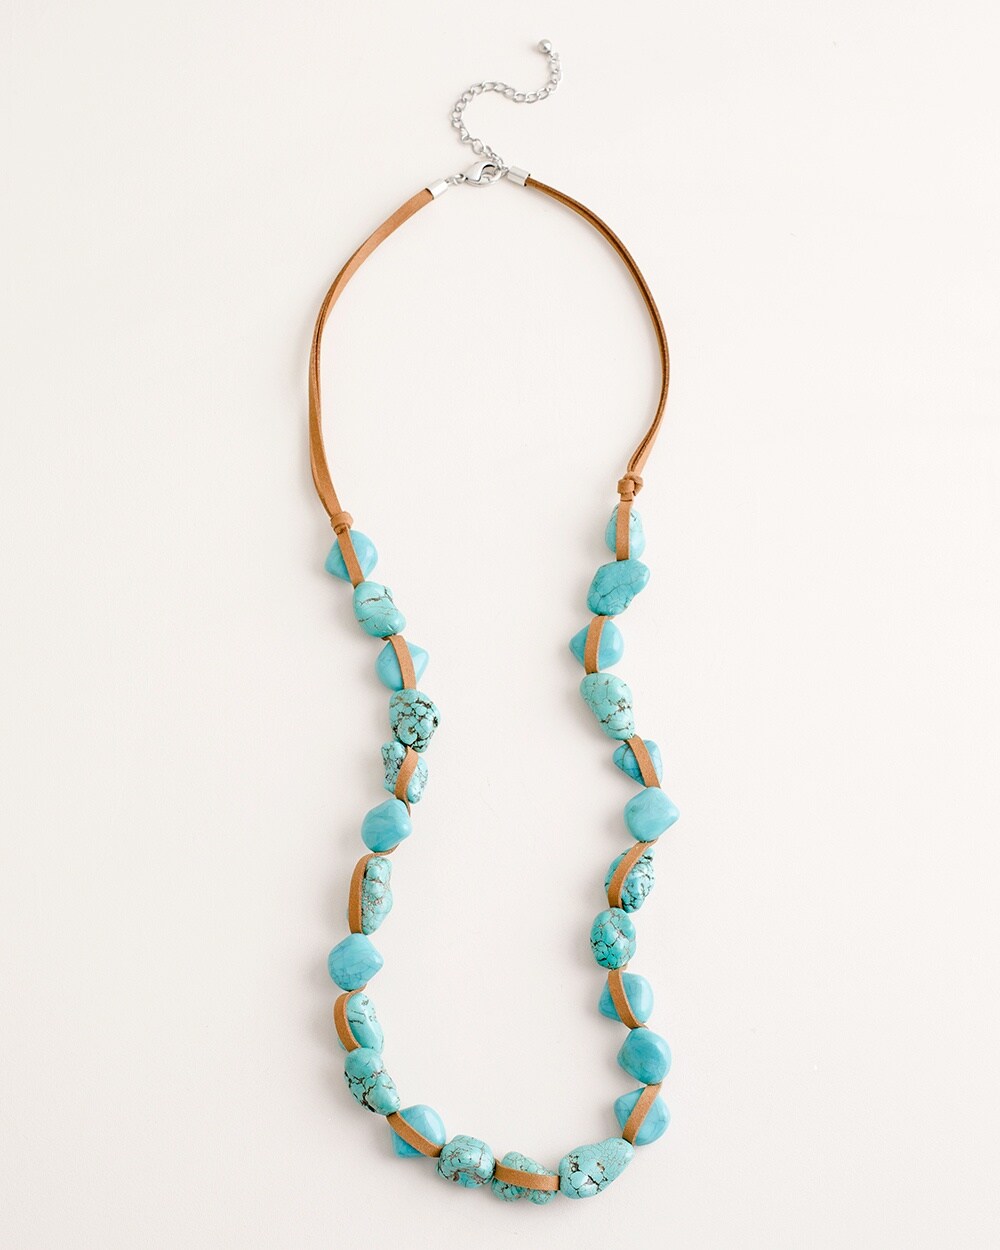 Turquoise-Colored Single-Strand Necklace